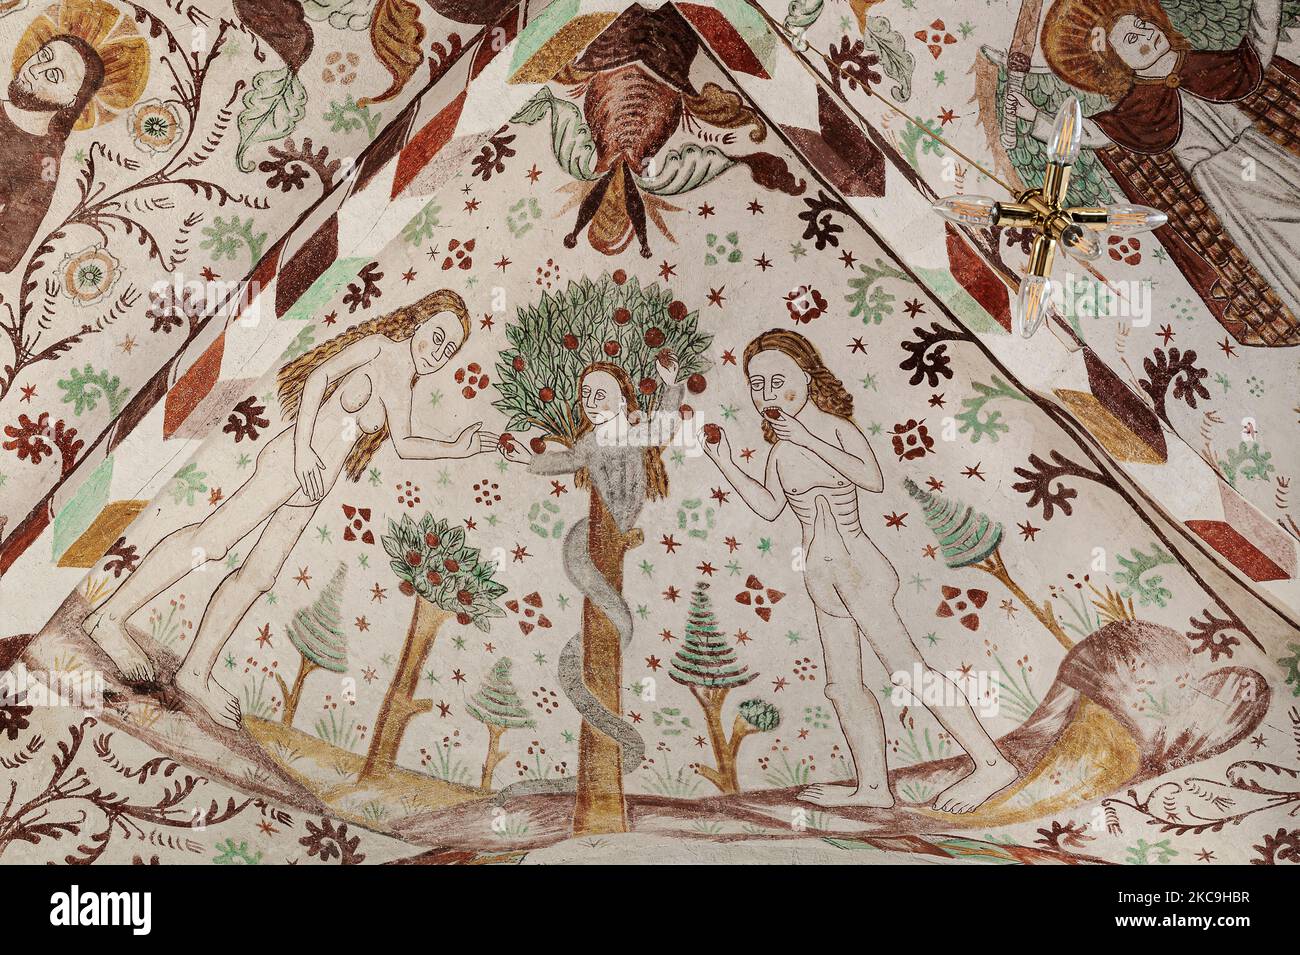 the temptation and fall of man, fresco in Fanefjord church, Denmark, October 10, 2022 Stock Photo